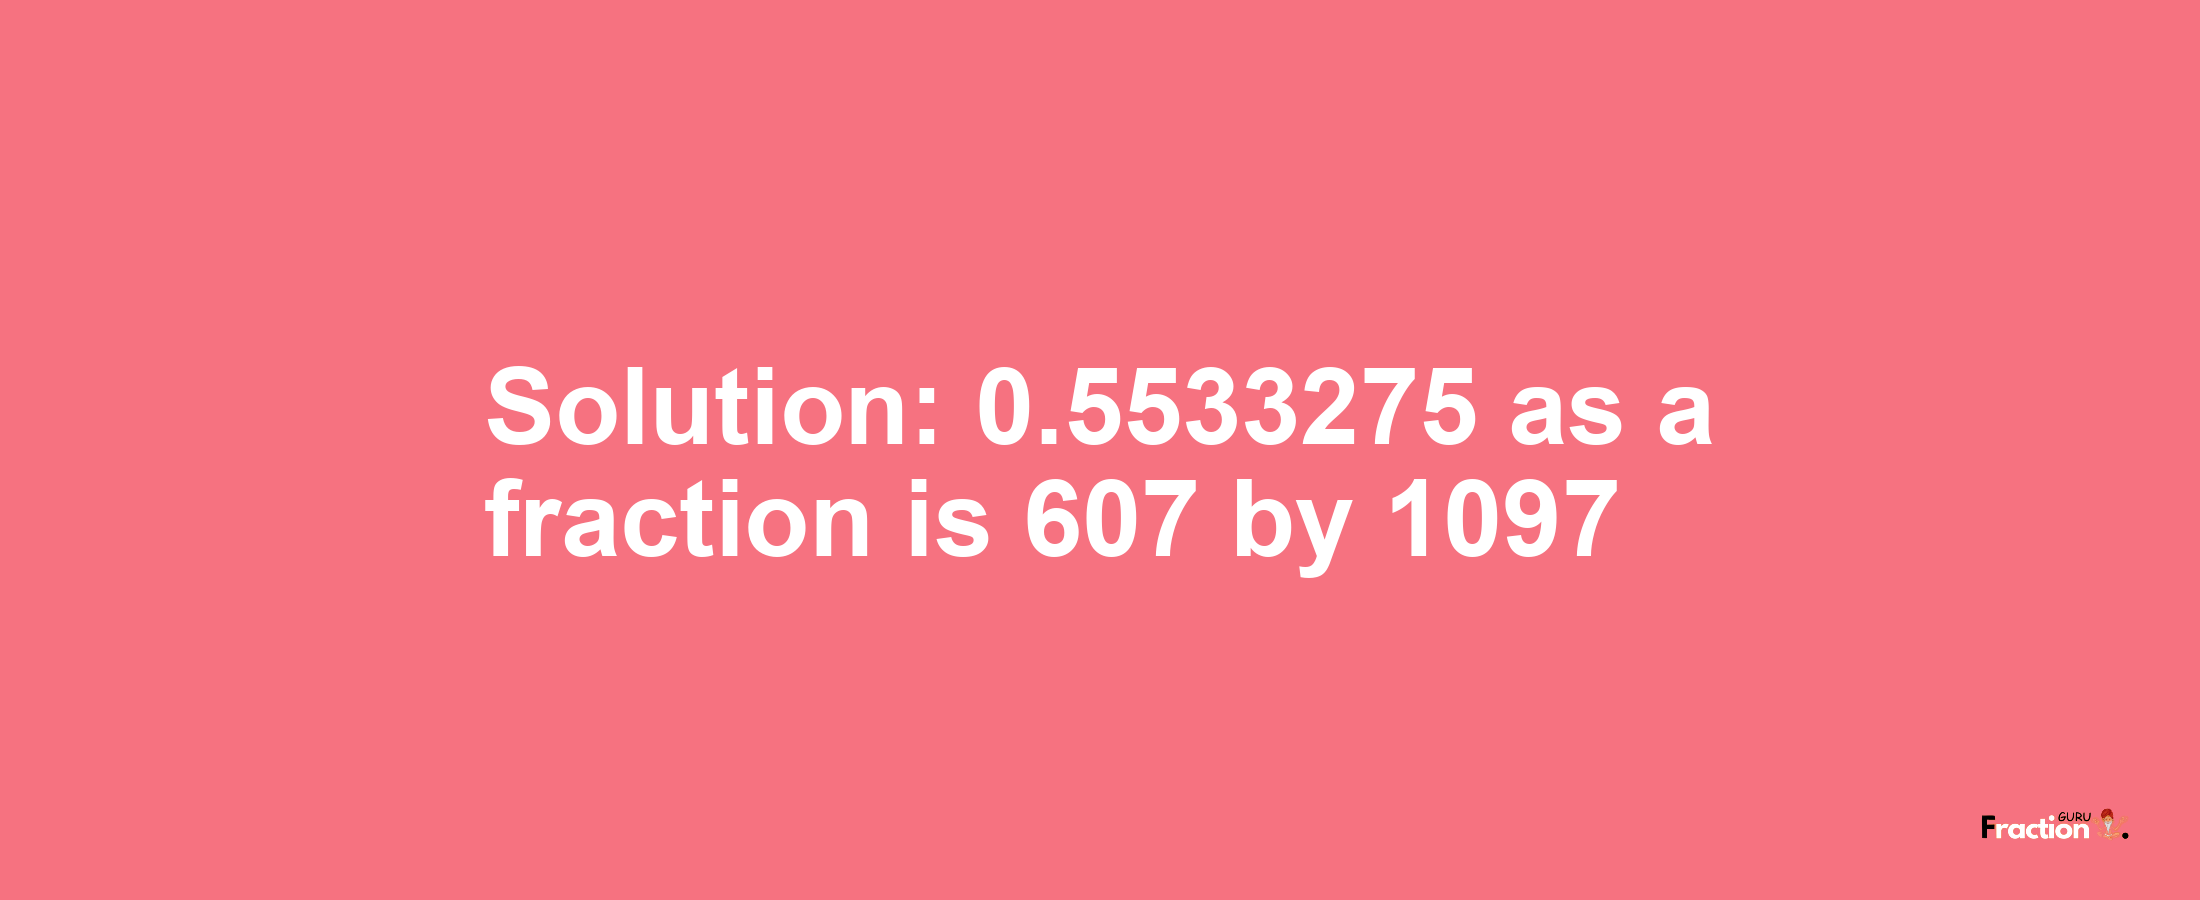 Solution:0.5533275 as a fraction is 607/1097